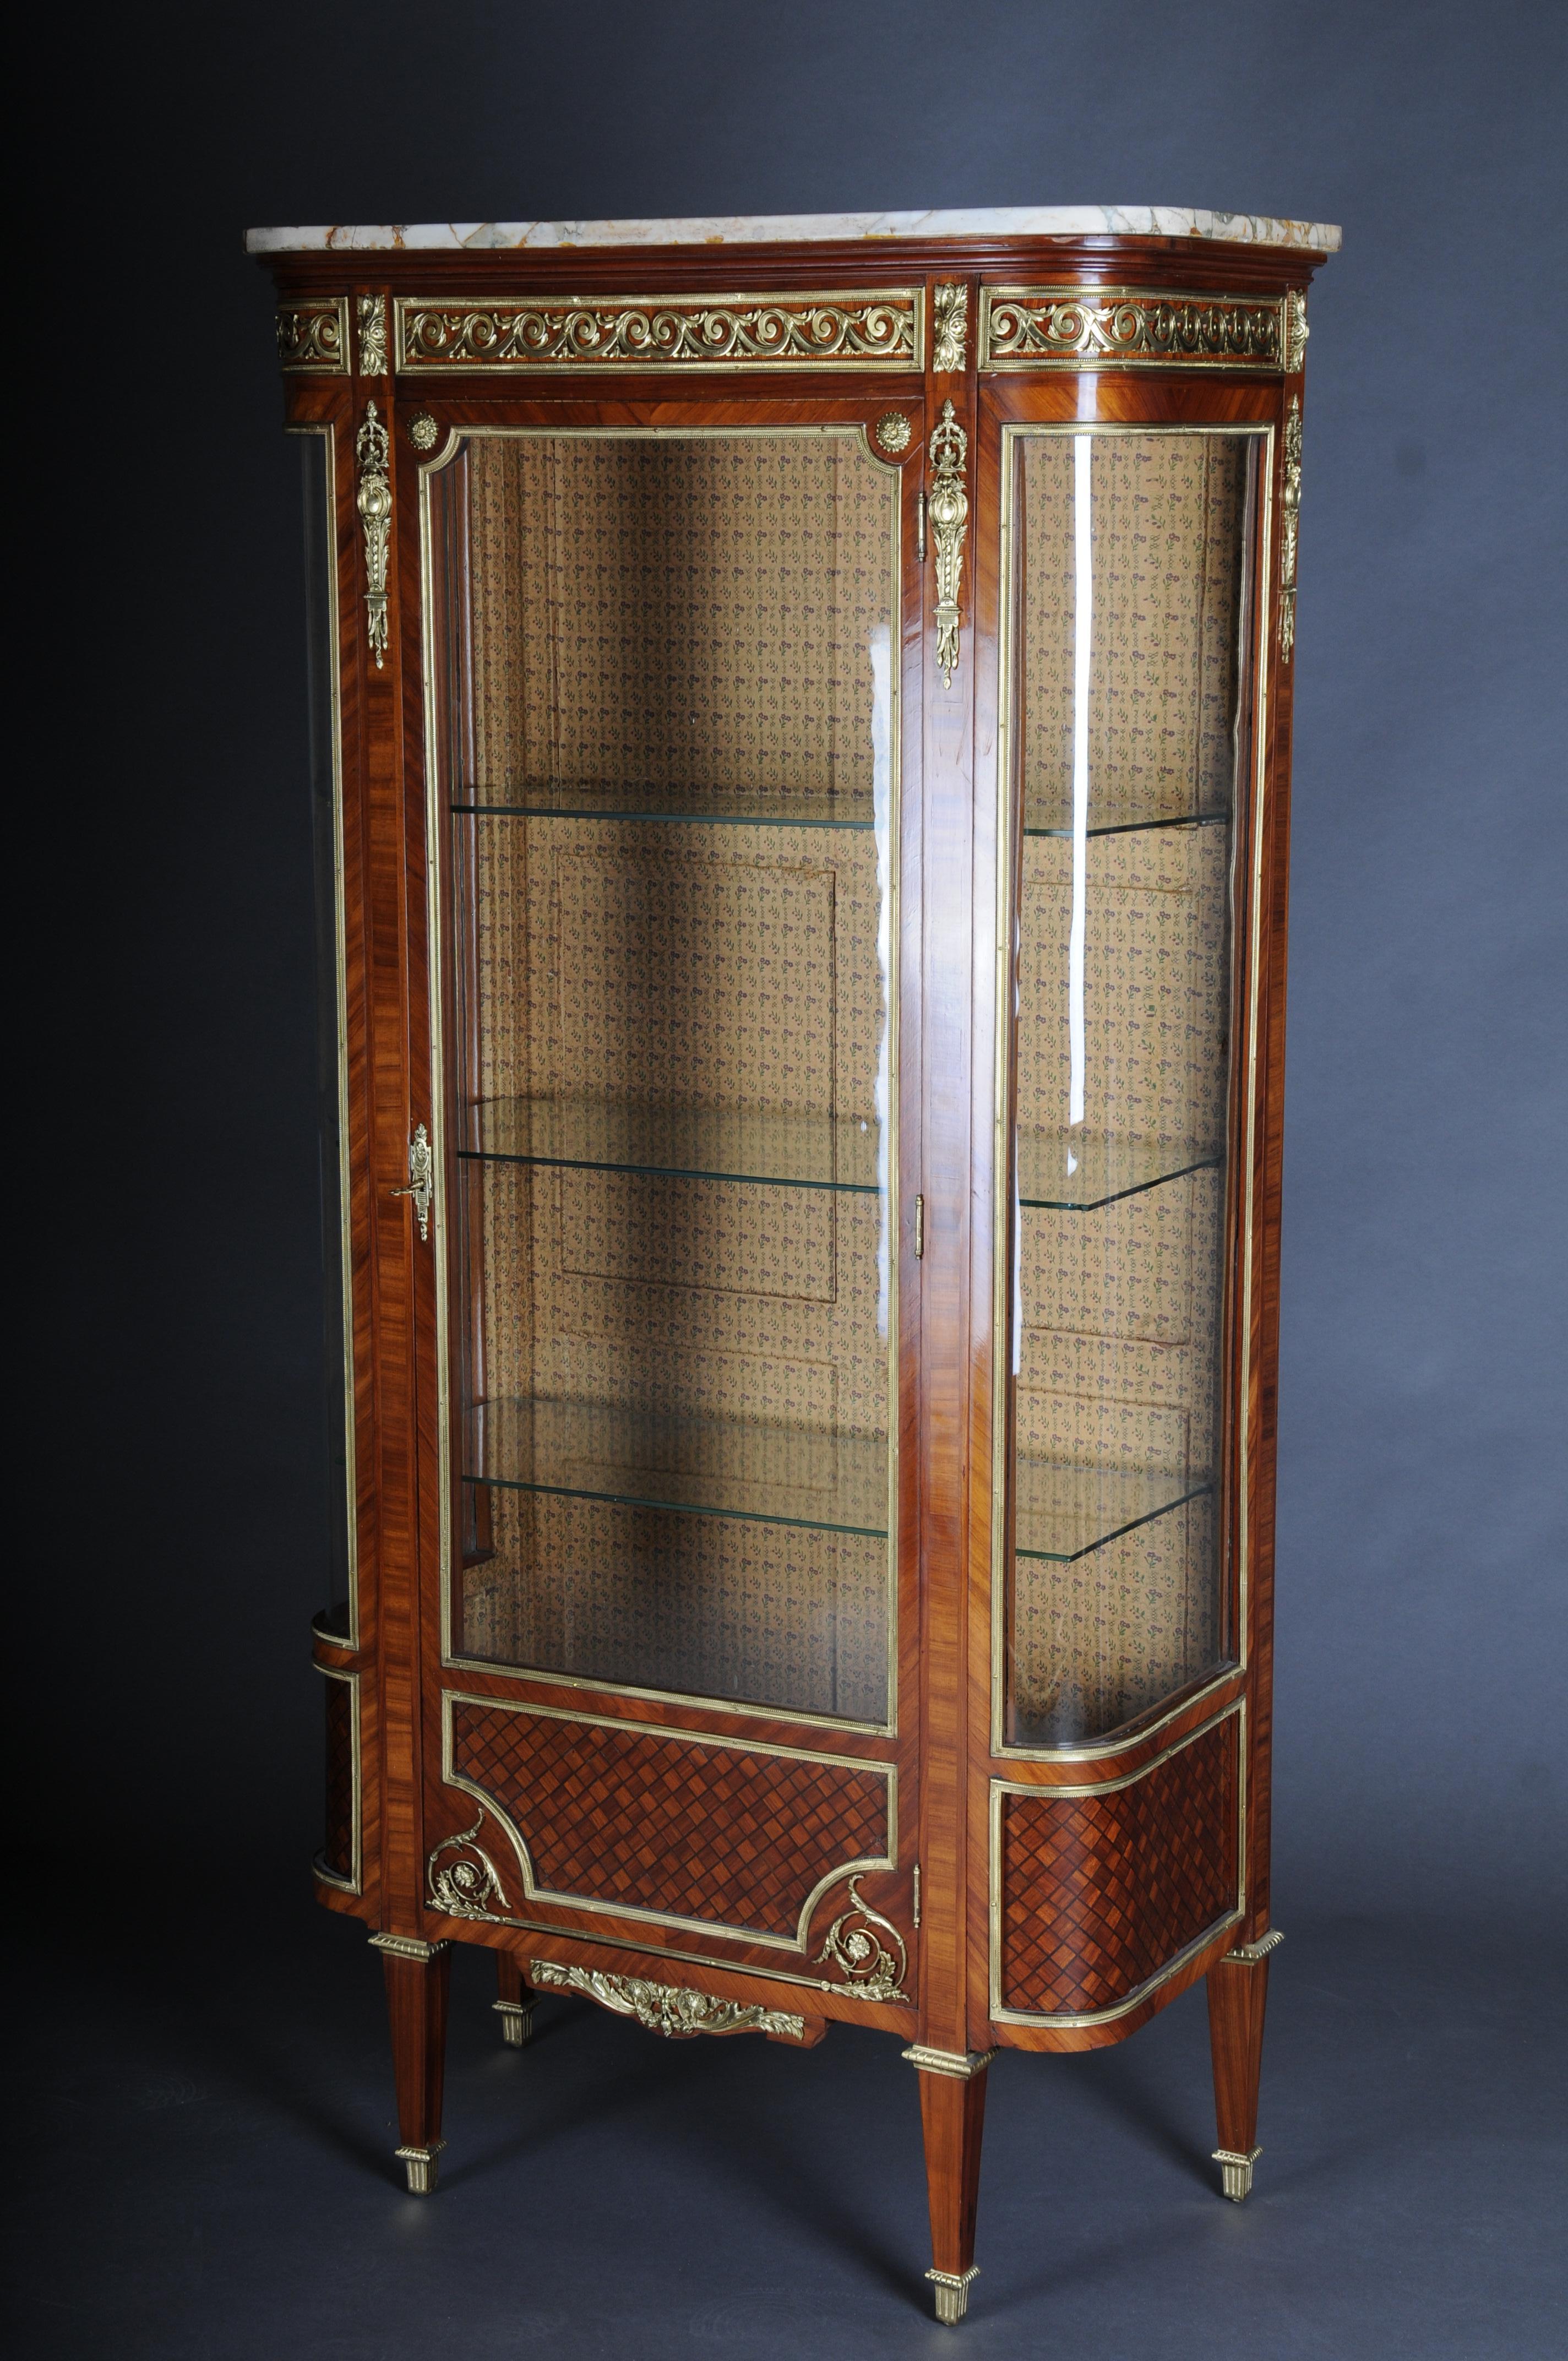 Louis XVI showcase Napoleon III, Paris around 1870.

Fine veneer on solid oak, veneered and paneled with ebony inlays. Straight, single-door body (solid oak) with white, grey-brown veined marble top. Three-sided glazing with rounded corners.